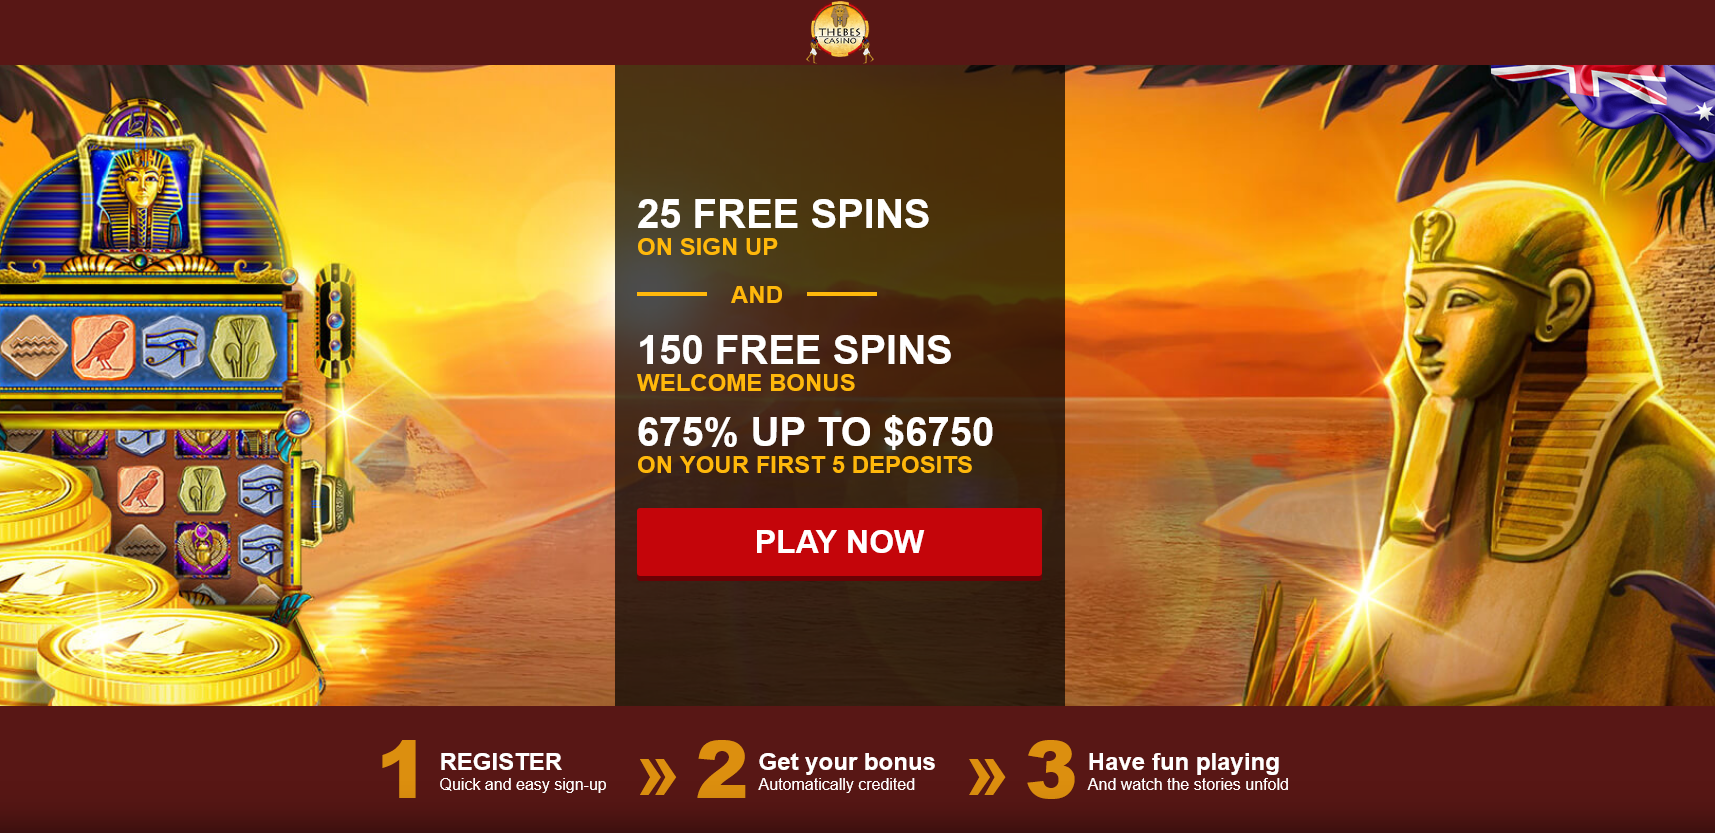 25 FREE SPINS ON SIGN UP AND 150 FREE SPINS WELCOME BONUS  675% UP TO $675